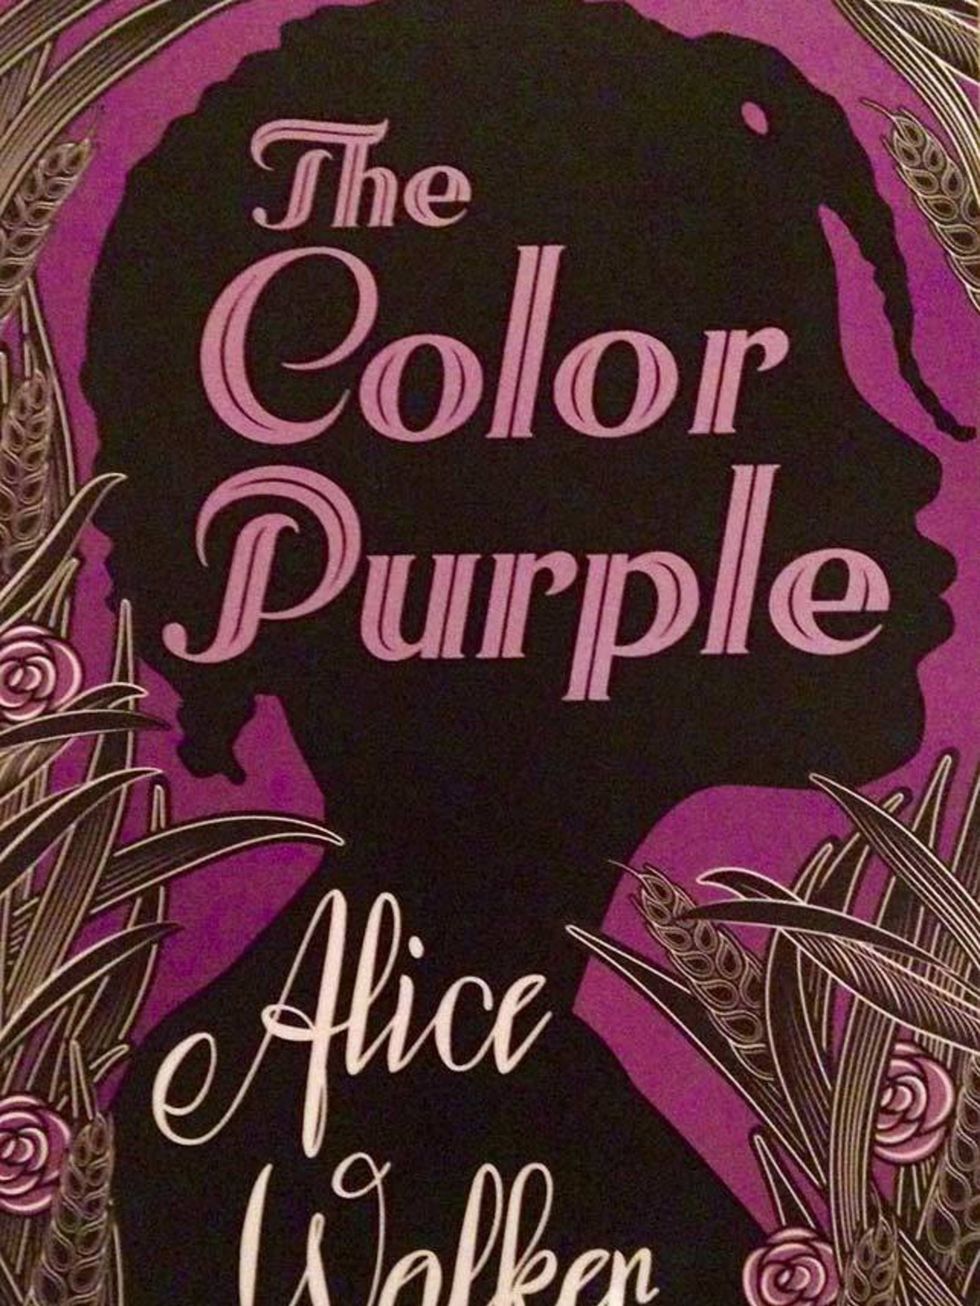 <p>The Color Purple by Alice Walker</p>

<p>Walker&rsquo;s Pulitzer-winning novel is set in Georgia in the 1930s and looks at the sexism and racism heroine Celie faces as a black woman. A violent, confronting but ultimately uplifting novel of sisterhood a